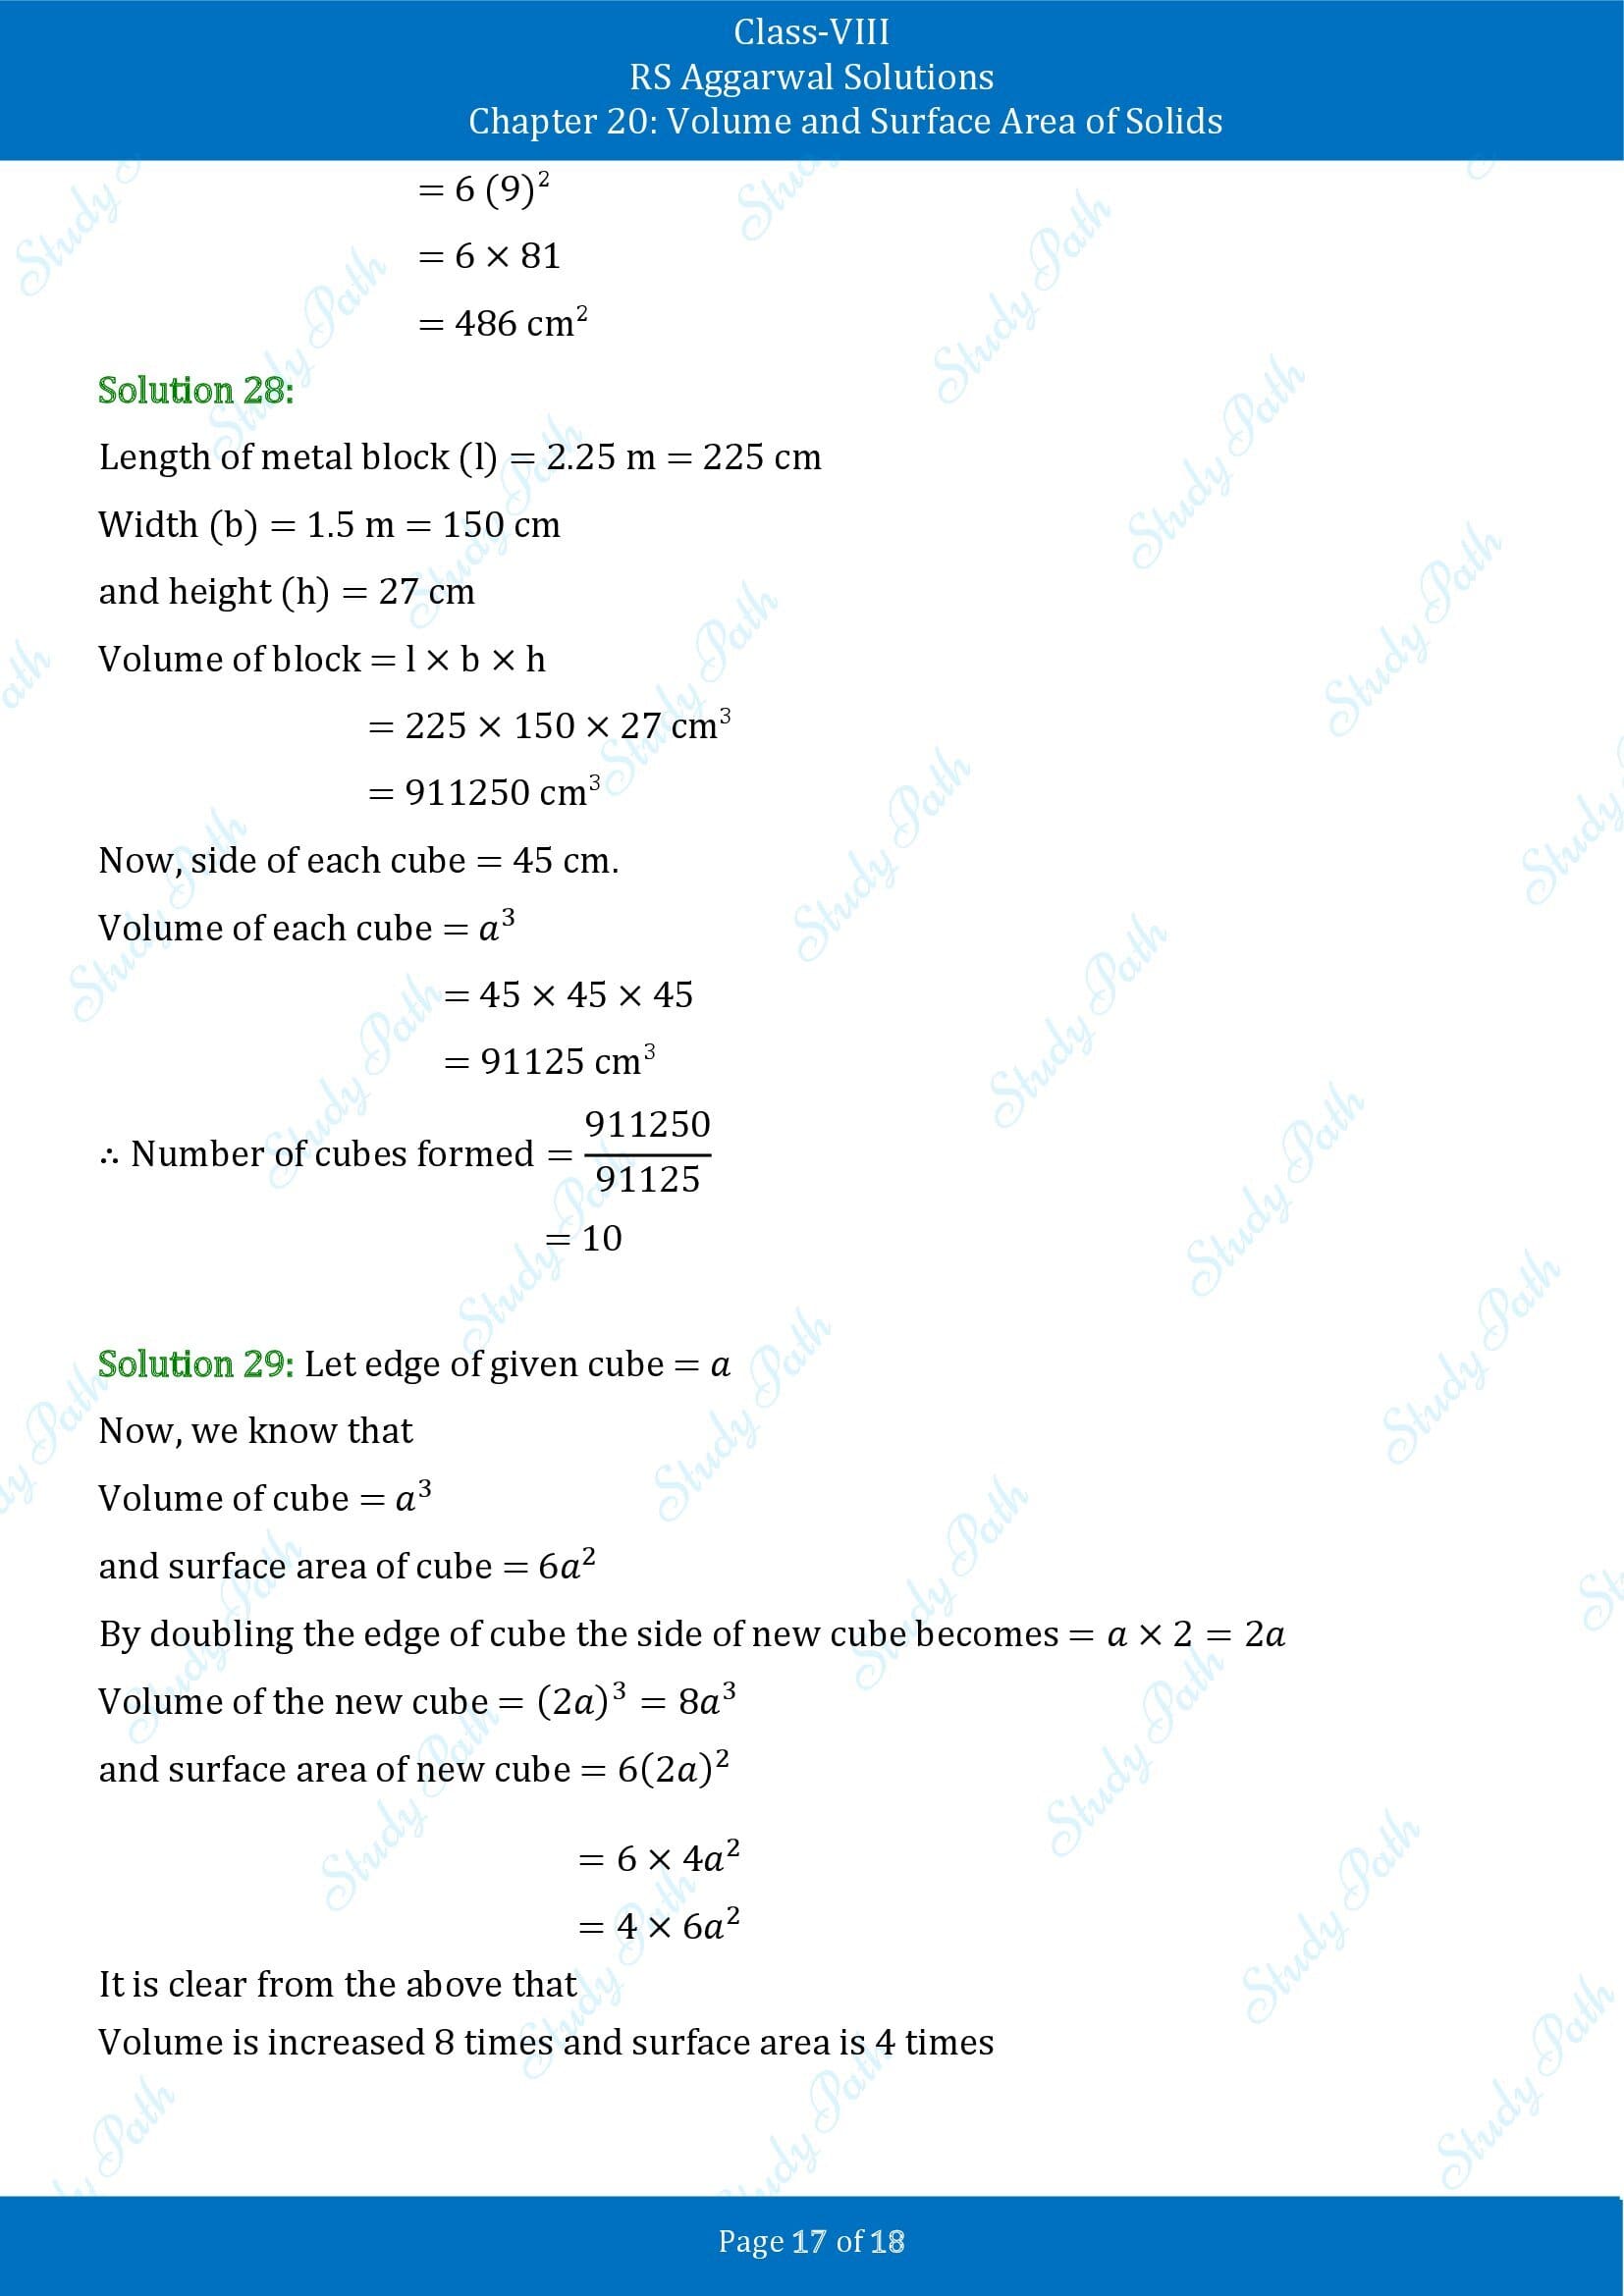 RS Aggarwal Solutions Class 8 Chapter 20 Volume and Surface Area of Solids Exercise 20A 00017